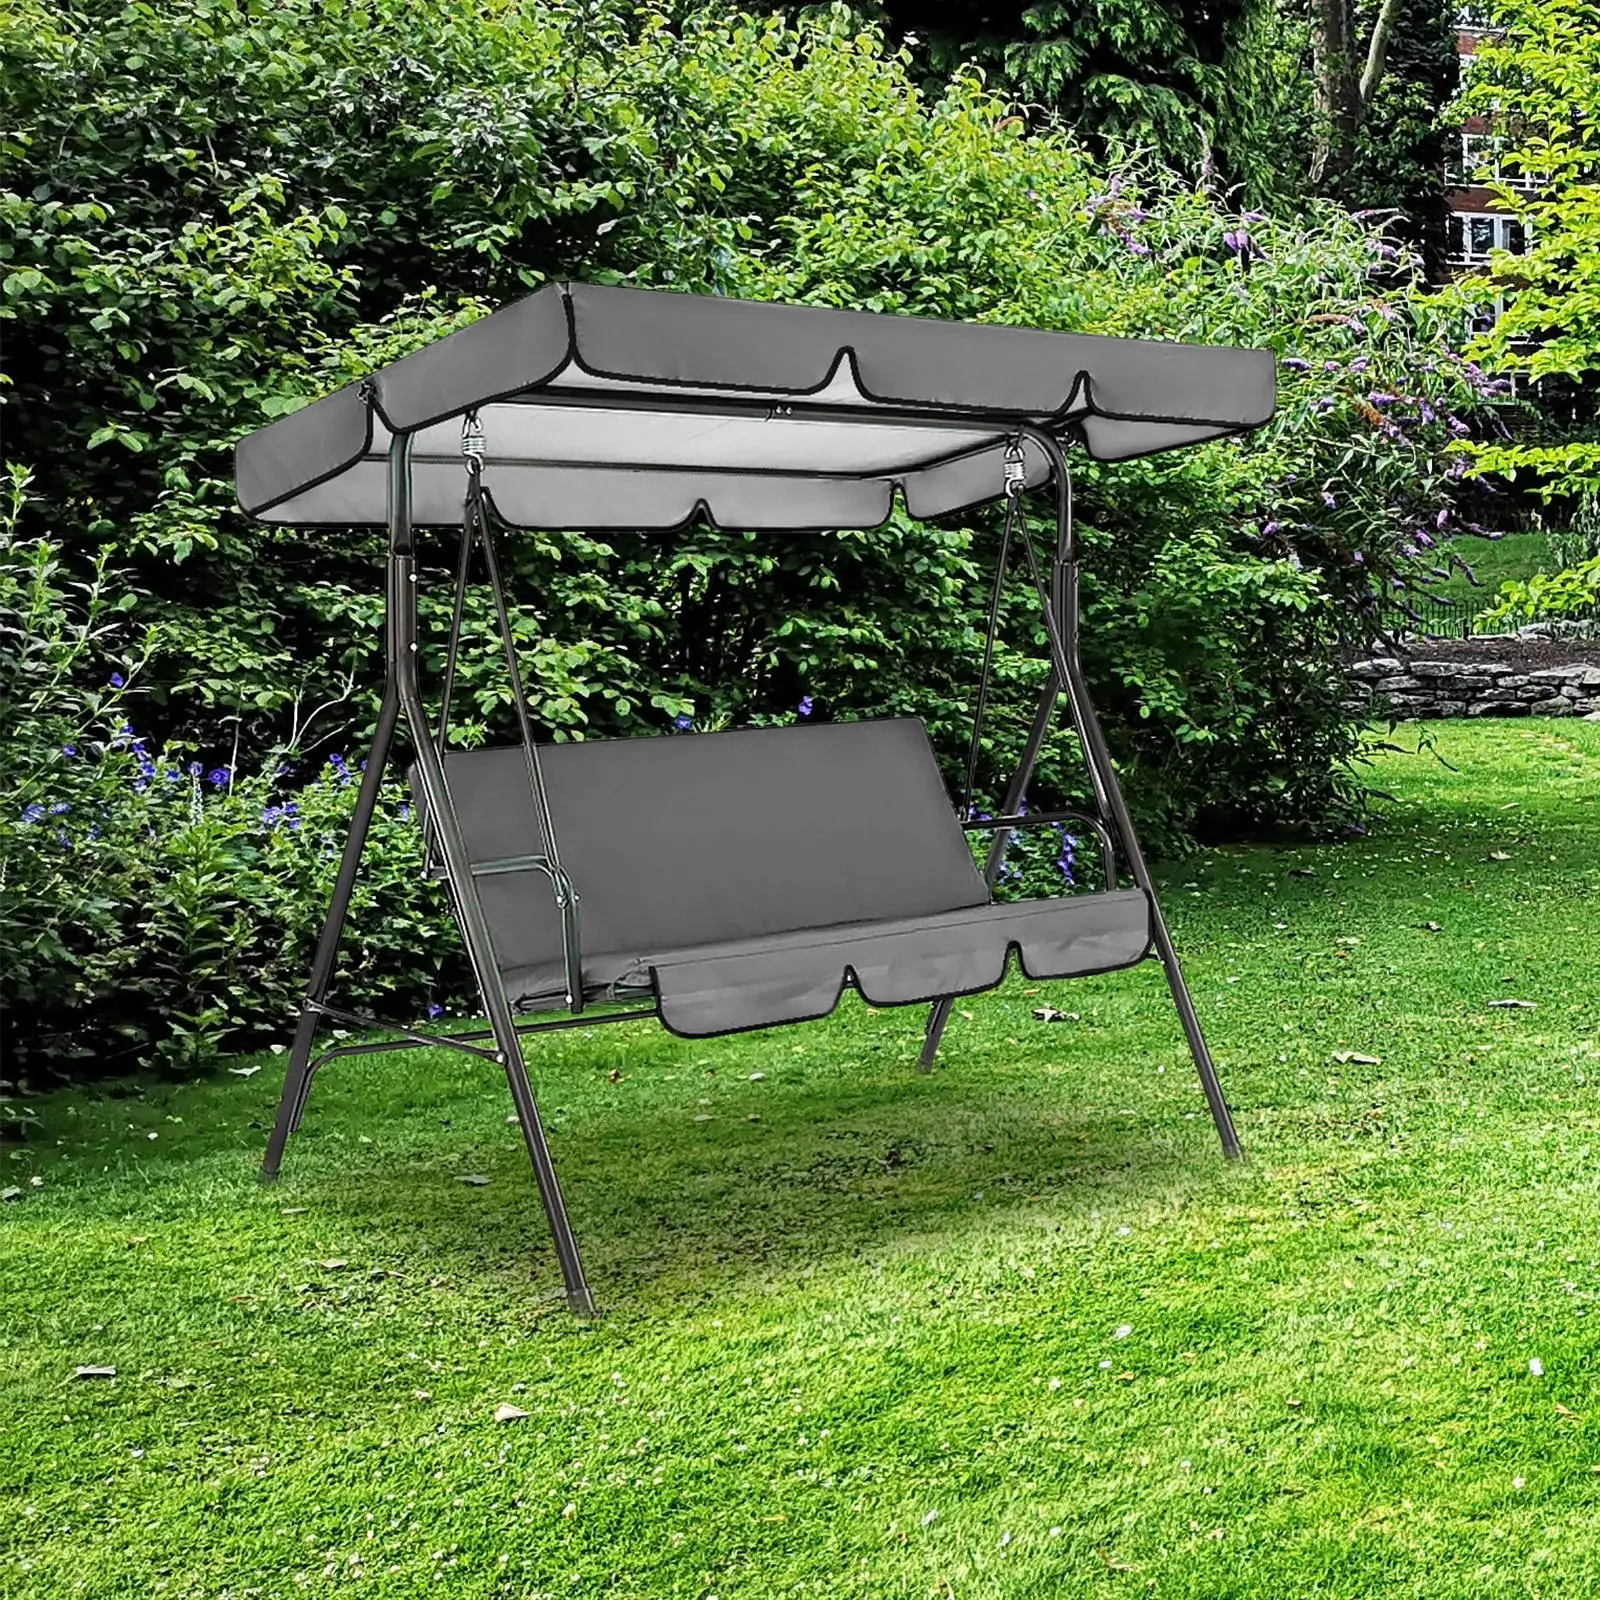 Patio Swing Canopy Garden Hammock Top Cover Durable Windproof Garden Swing Chair Cover for Swing Patio Porch Seat Outdoor